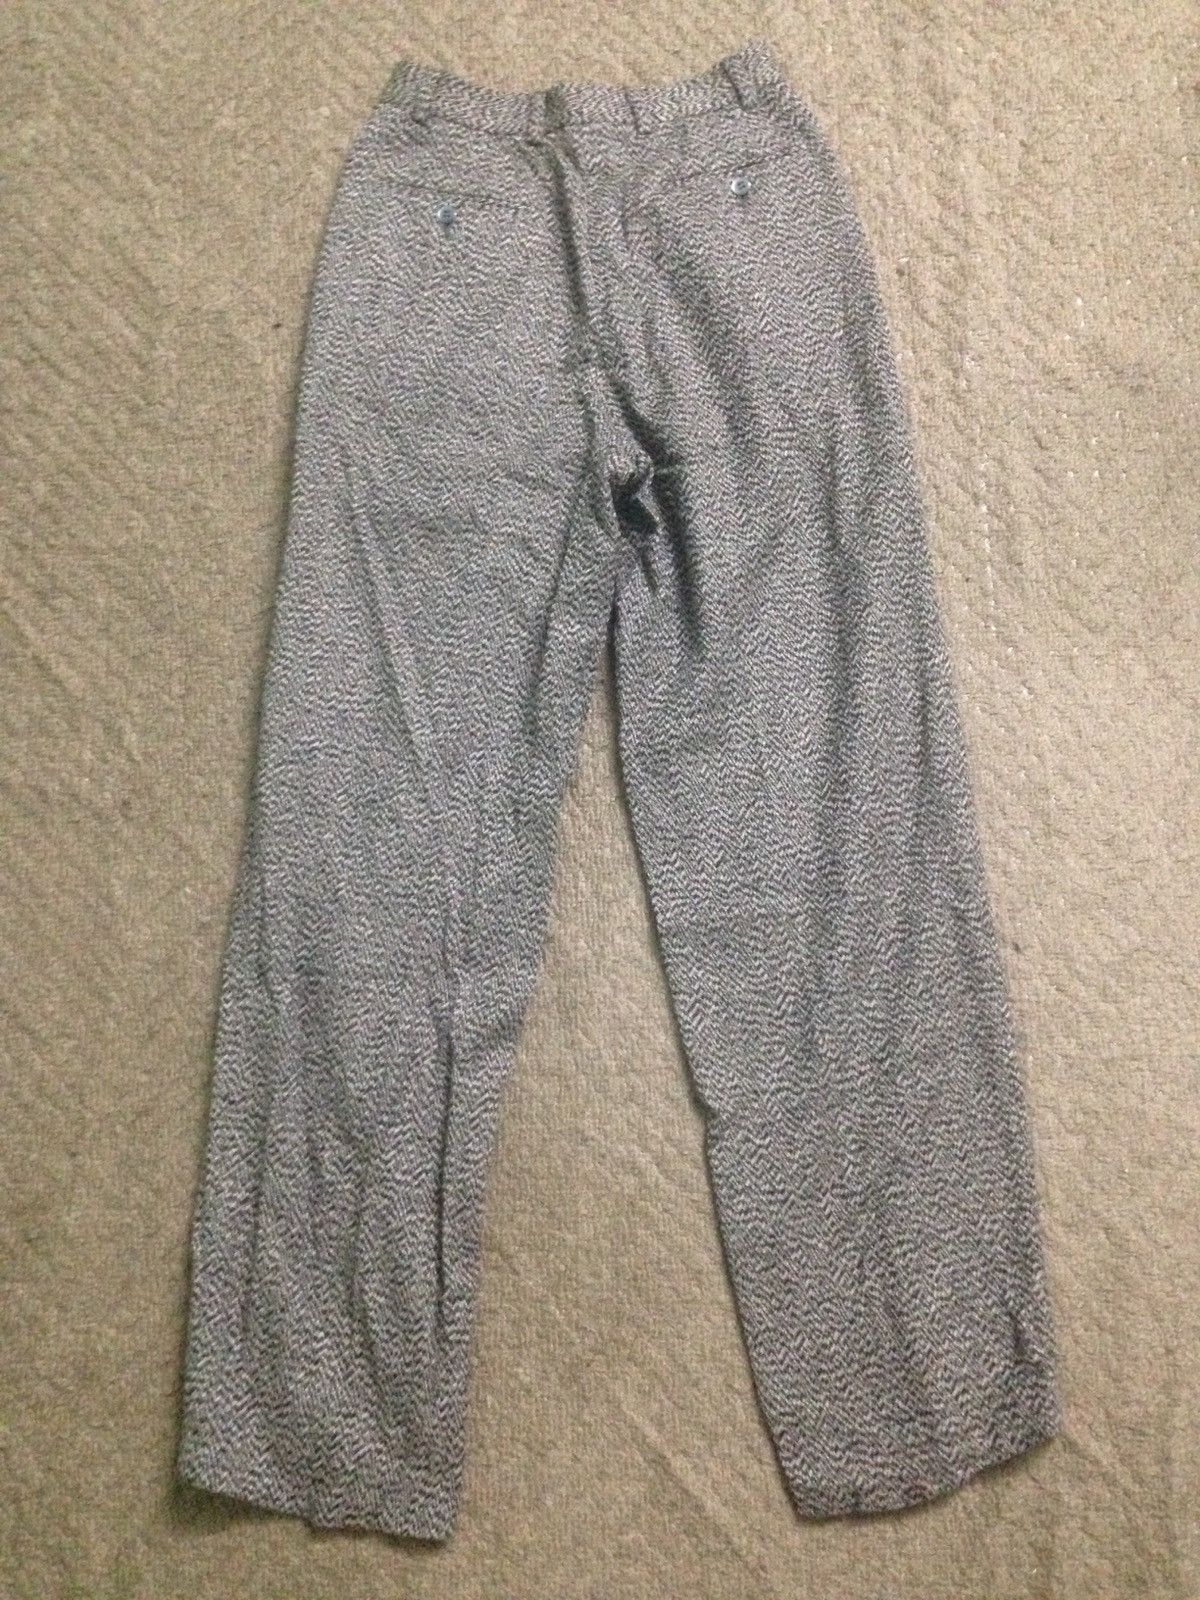 Vintage Giorgio Armani Wool Pants Made In Italy -R6 - 3